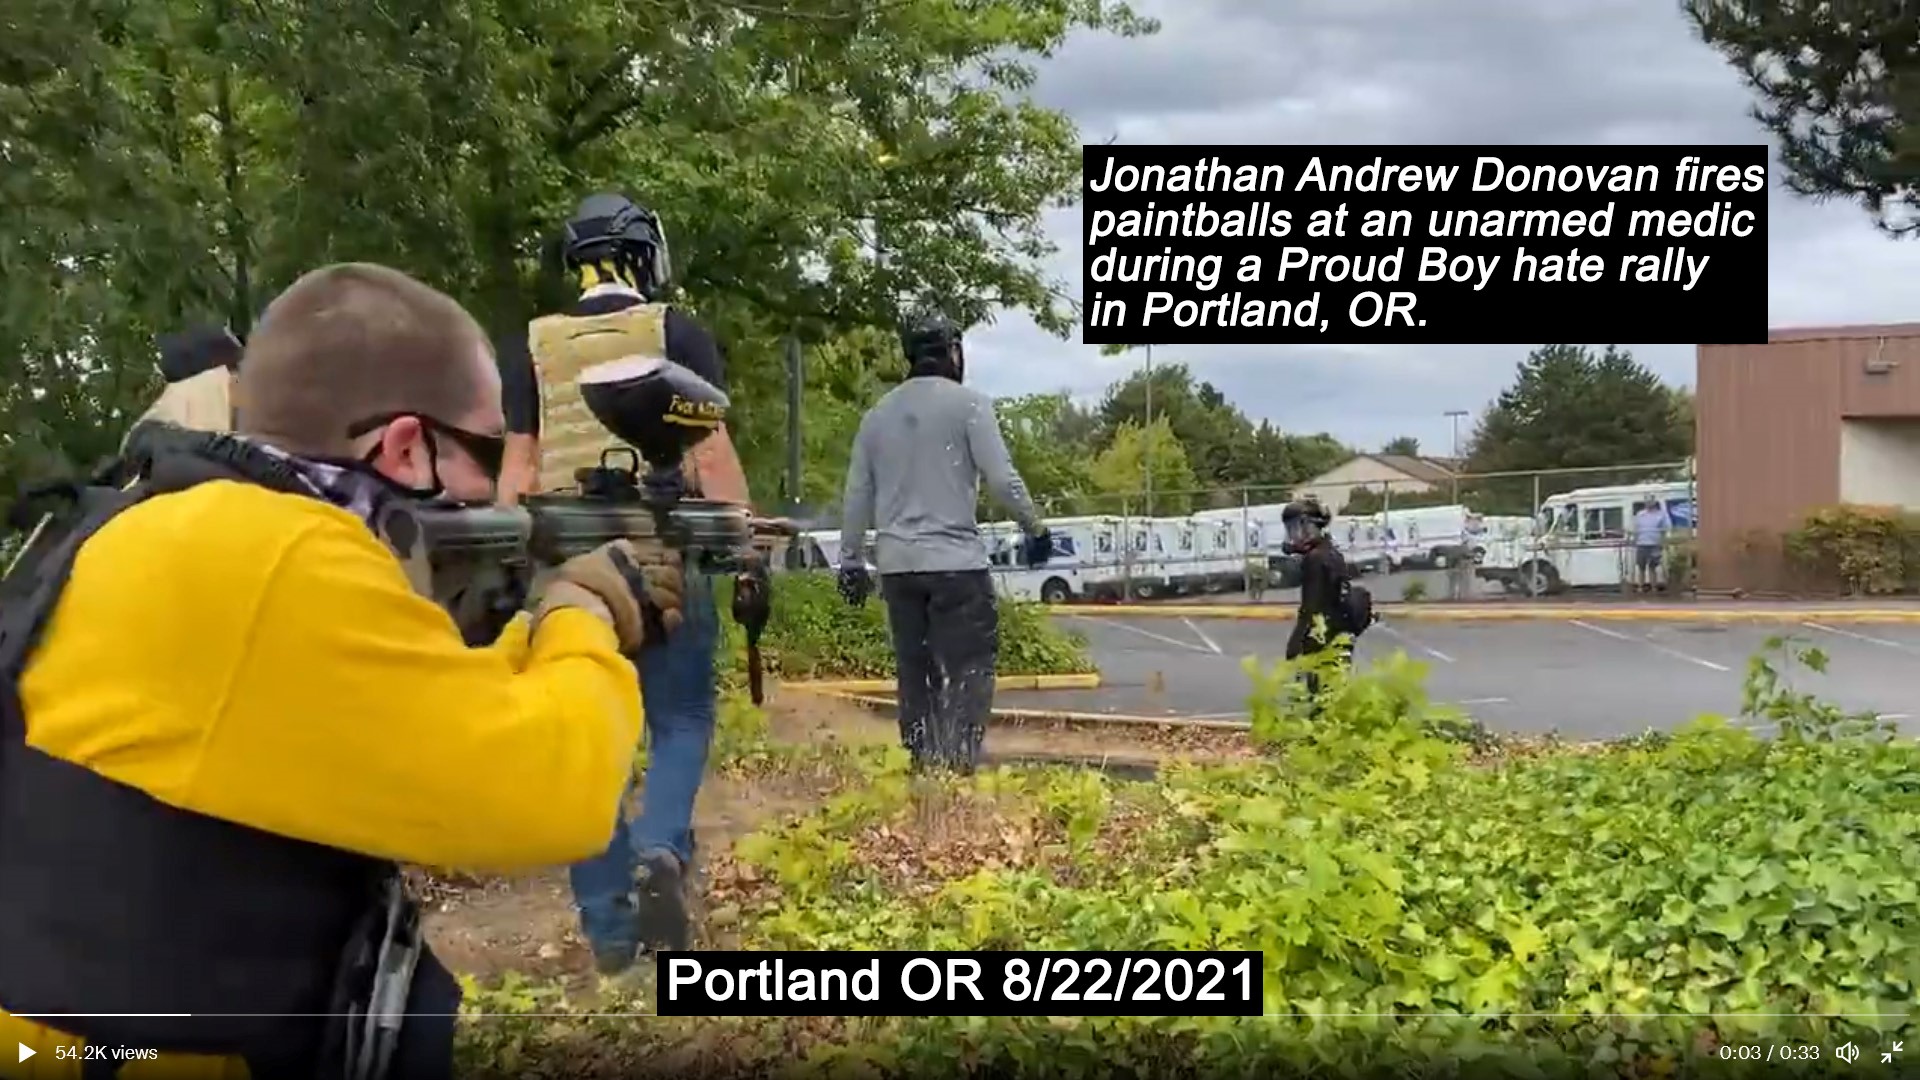 Jonathan Donovan is seen in the foreground shooting his paintball gun at a fleeing medic in Portland. 